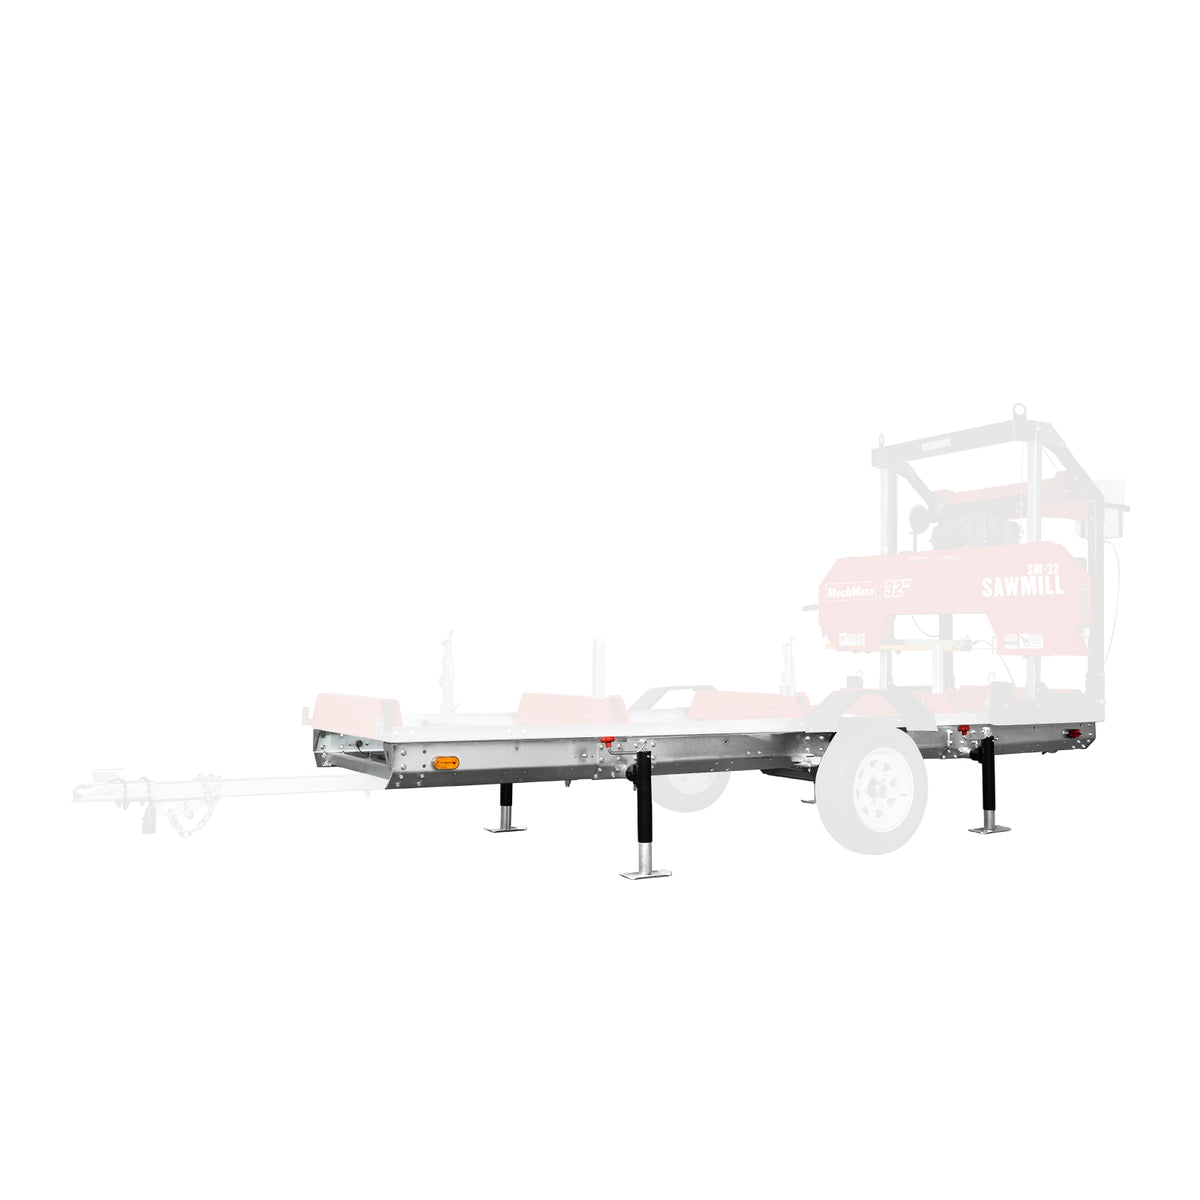 Primary Sub-Frame for Sawmill Trailer , 13' Track Length ( Compatible for SM-32 )